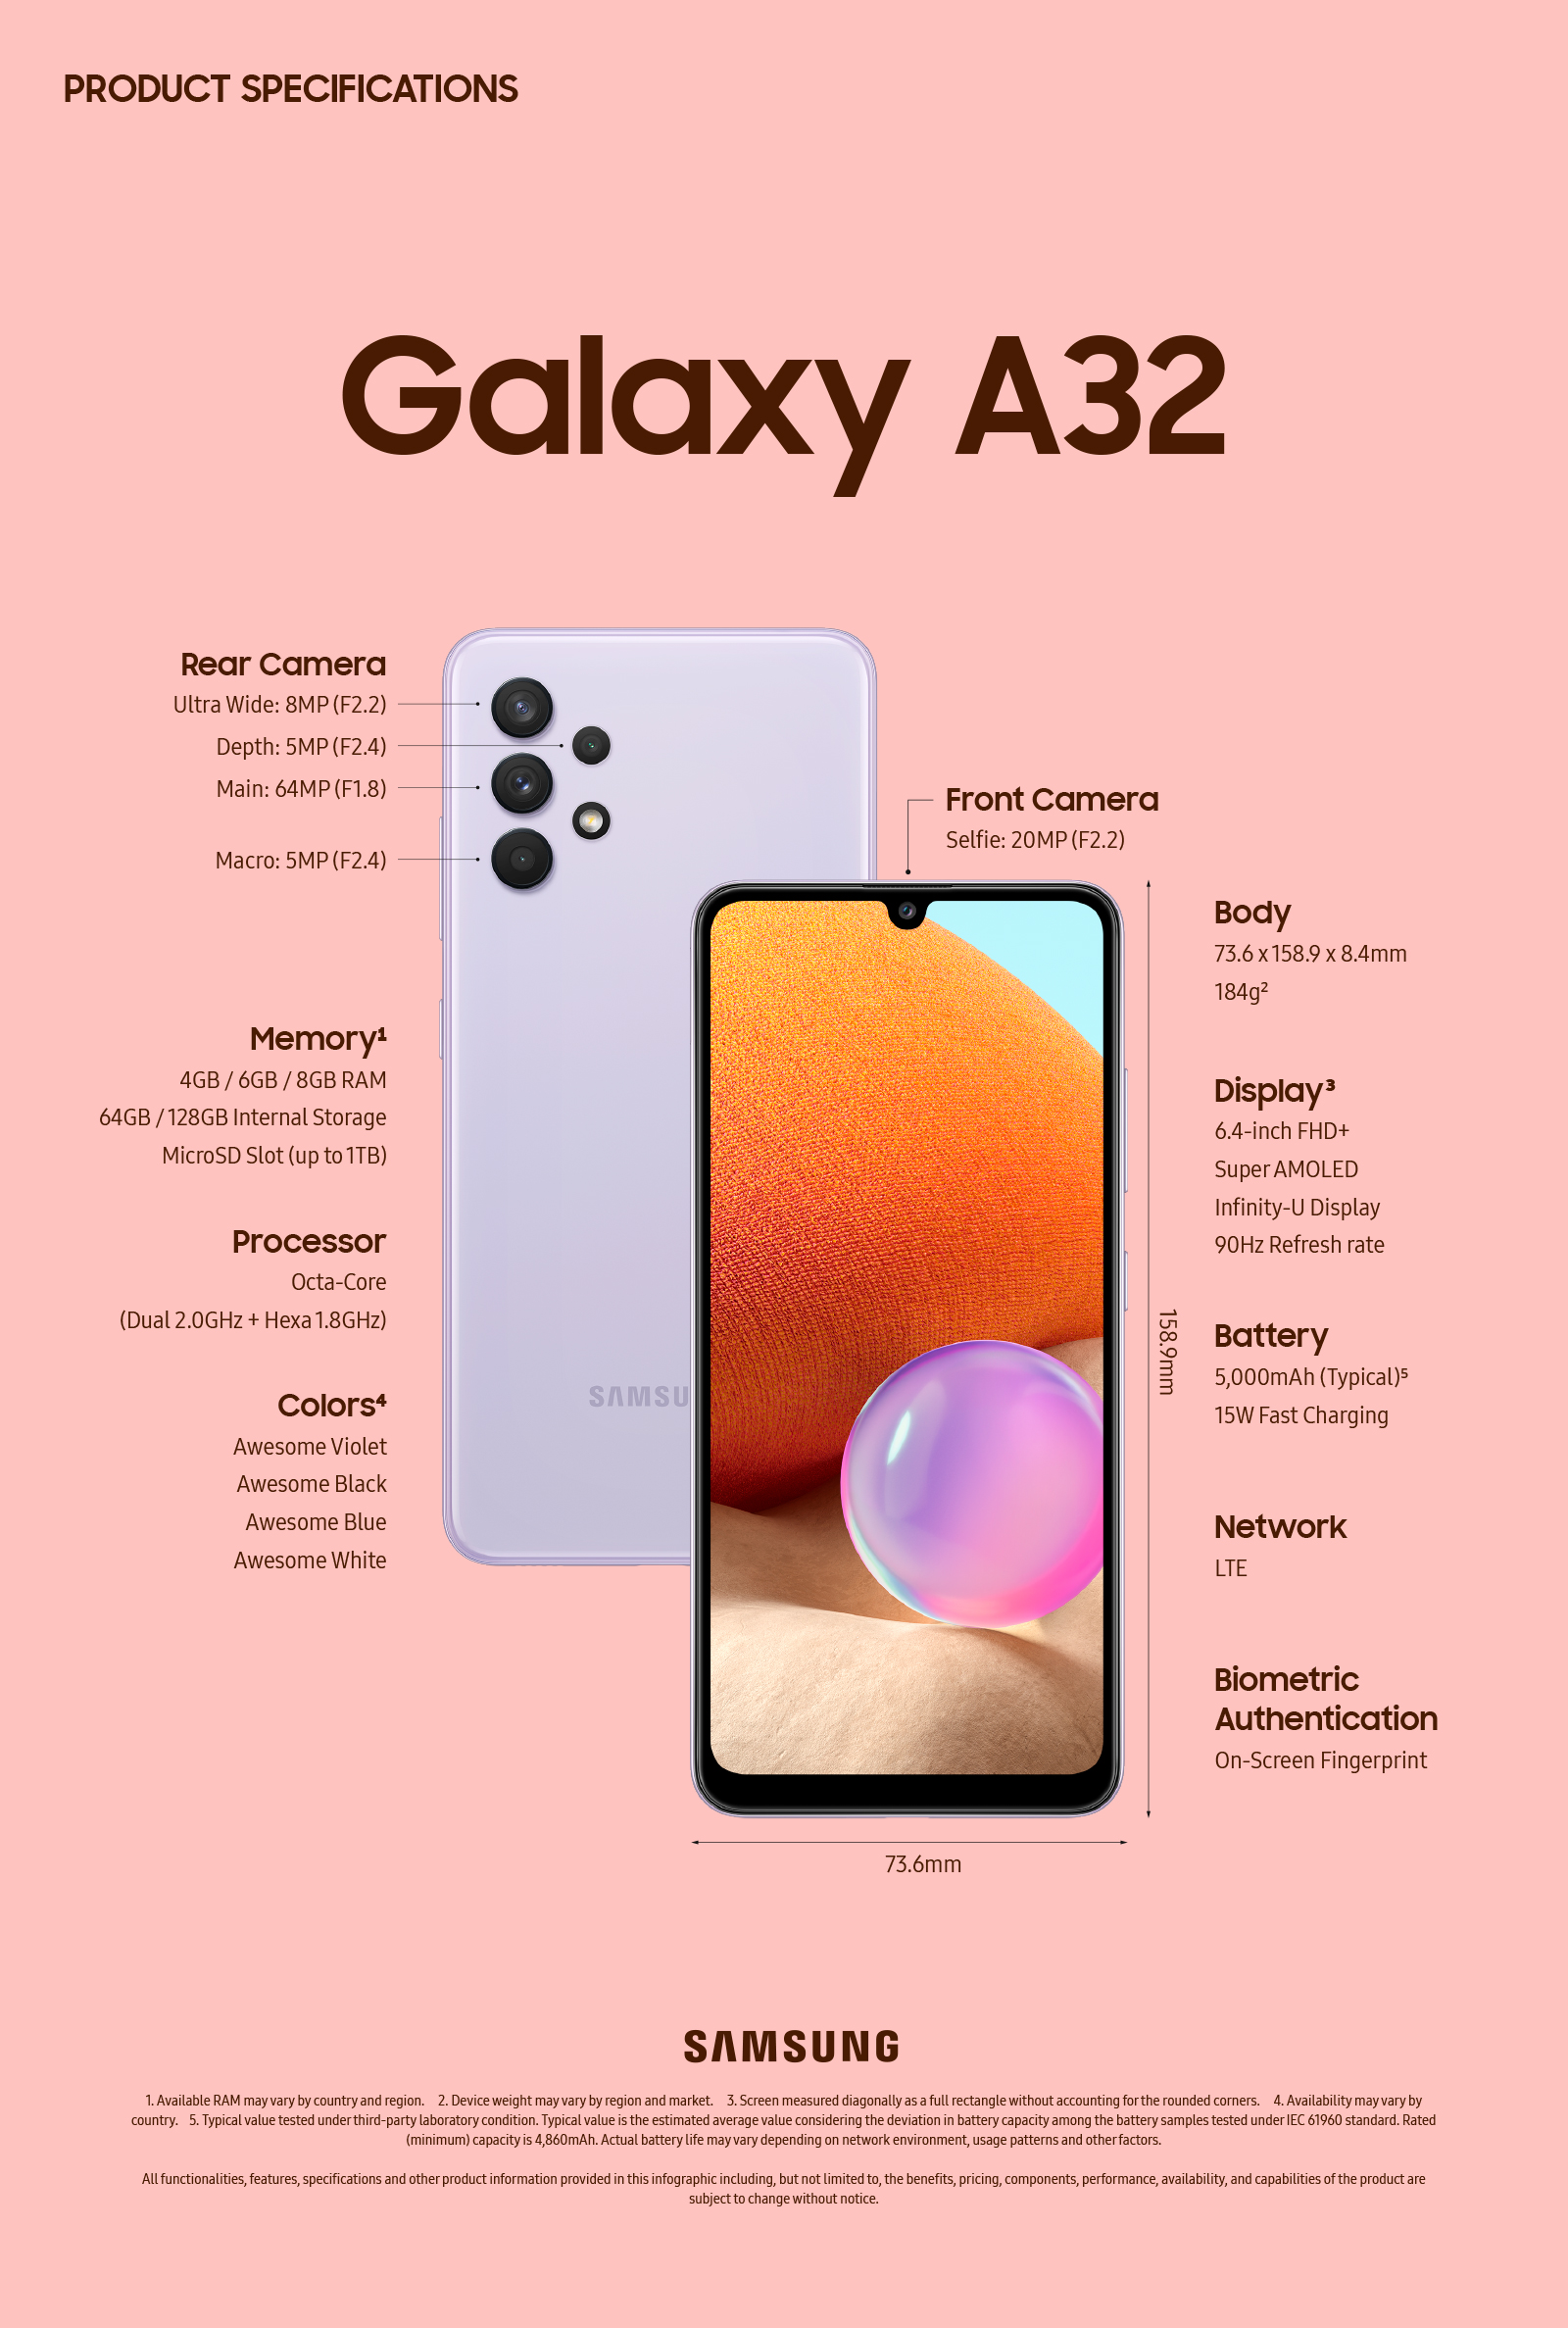 Samsung Galaxy A32 4G Specifications Infographic